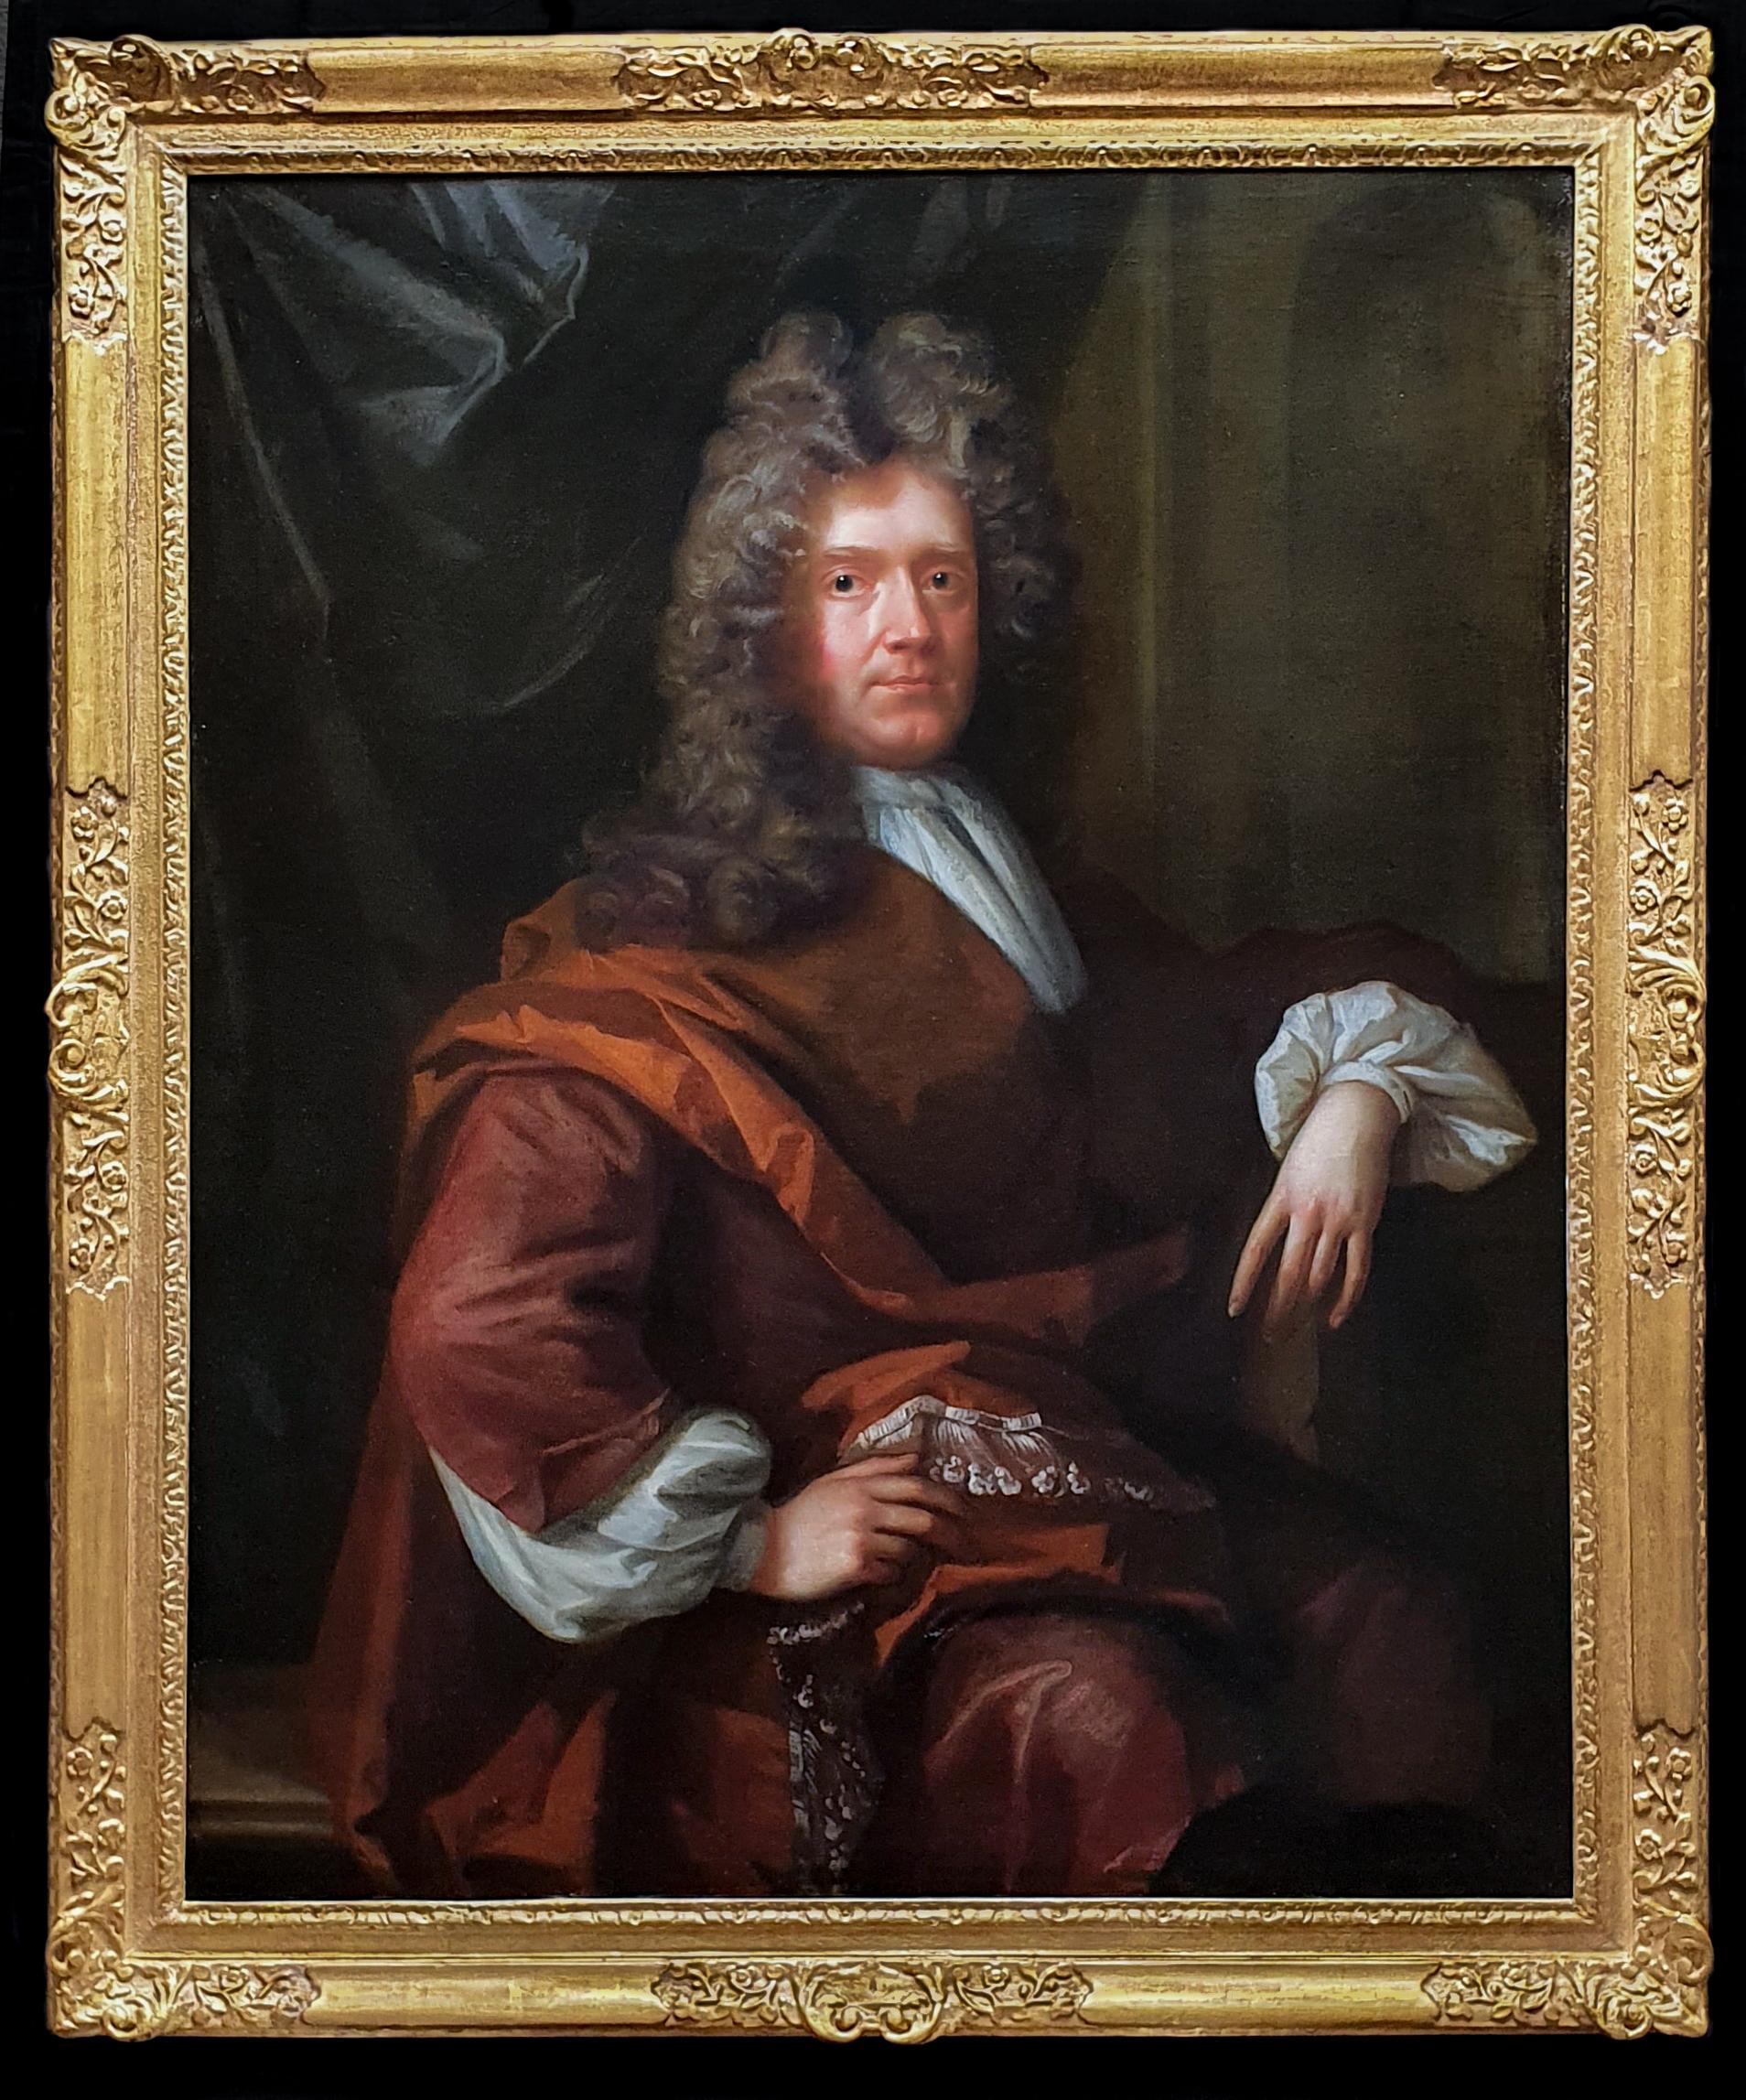 John Closterman Portrait Painting - Portrait of a Seated Gentleman in Brown Robes, Antique Oil Painting